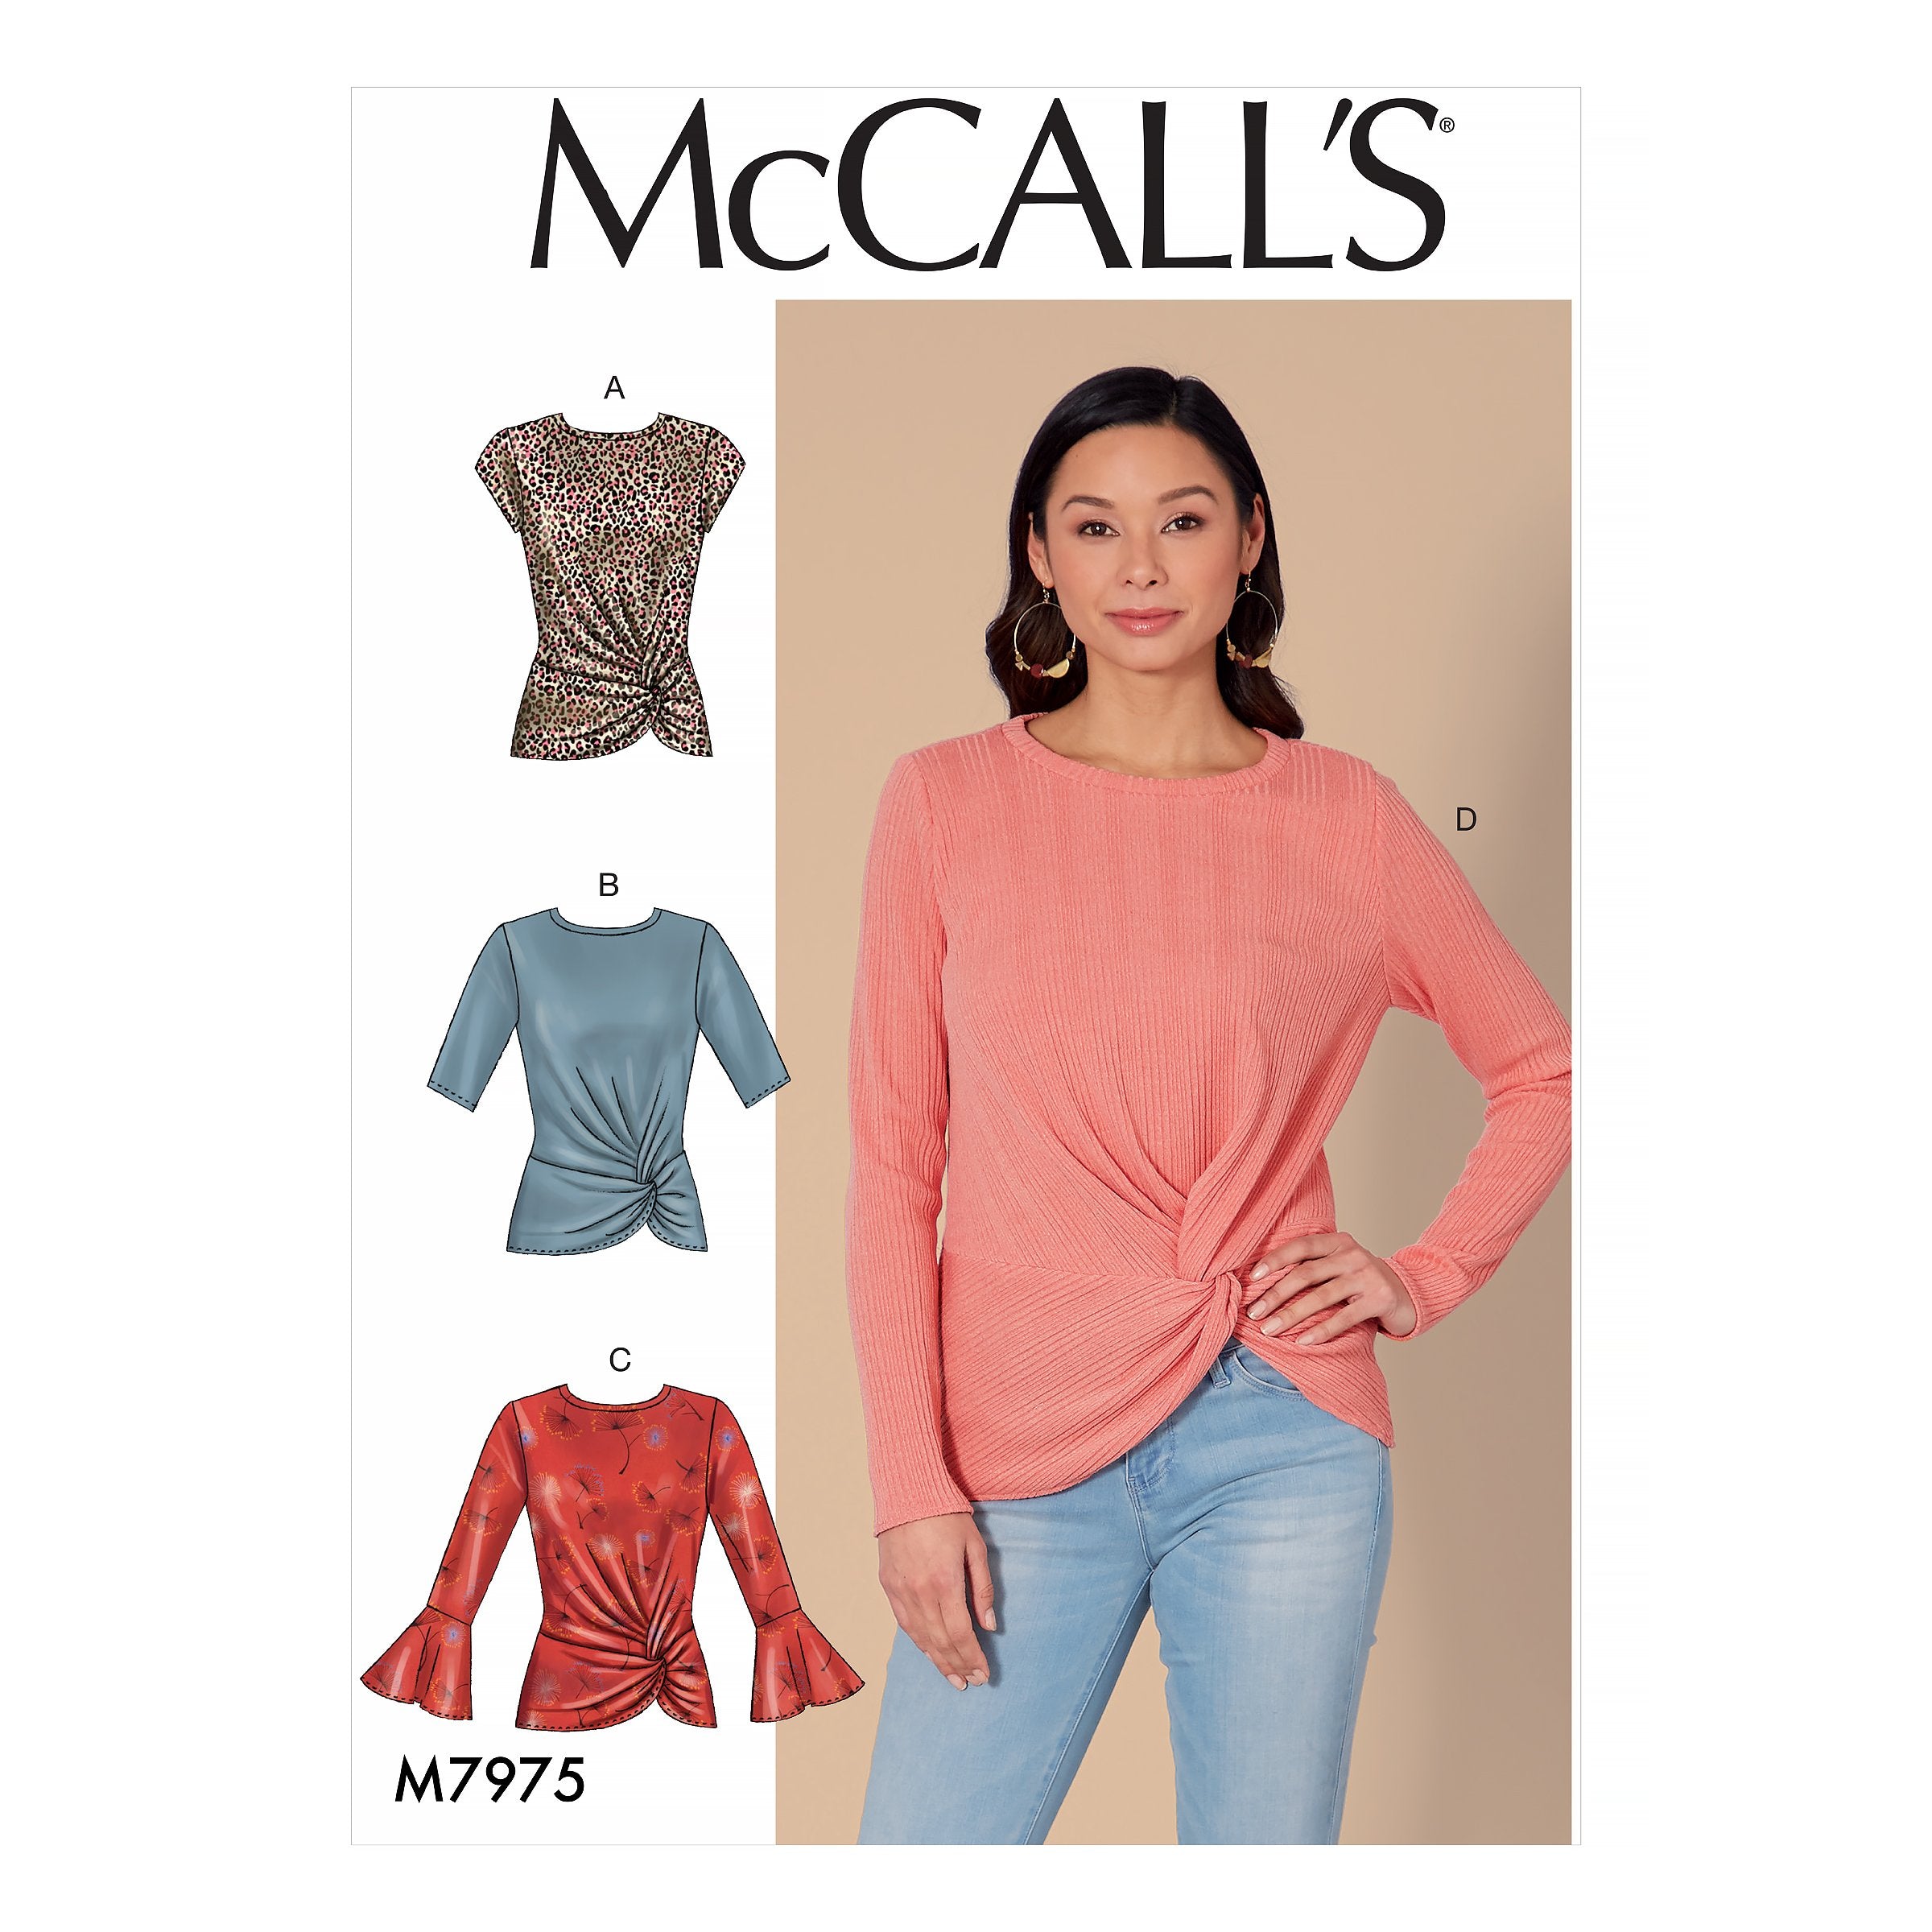 McCalls 7975 Tops sewing pattern from Jaycotts Sewing Supplies